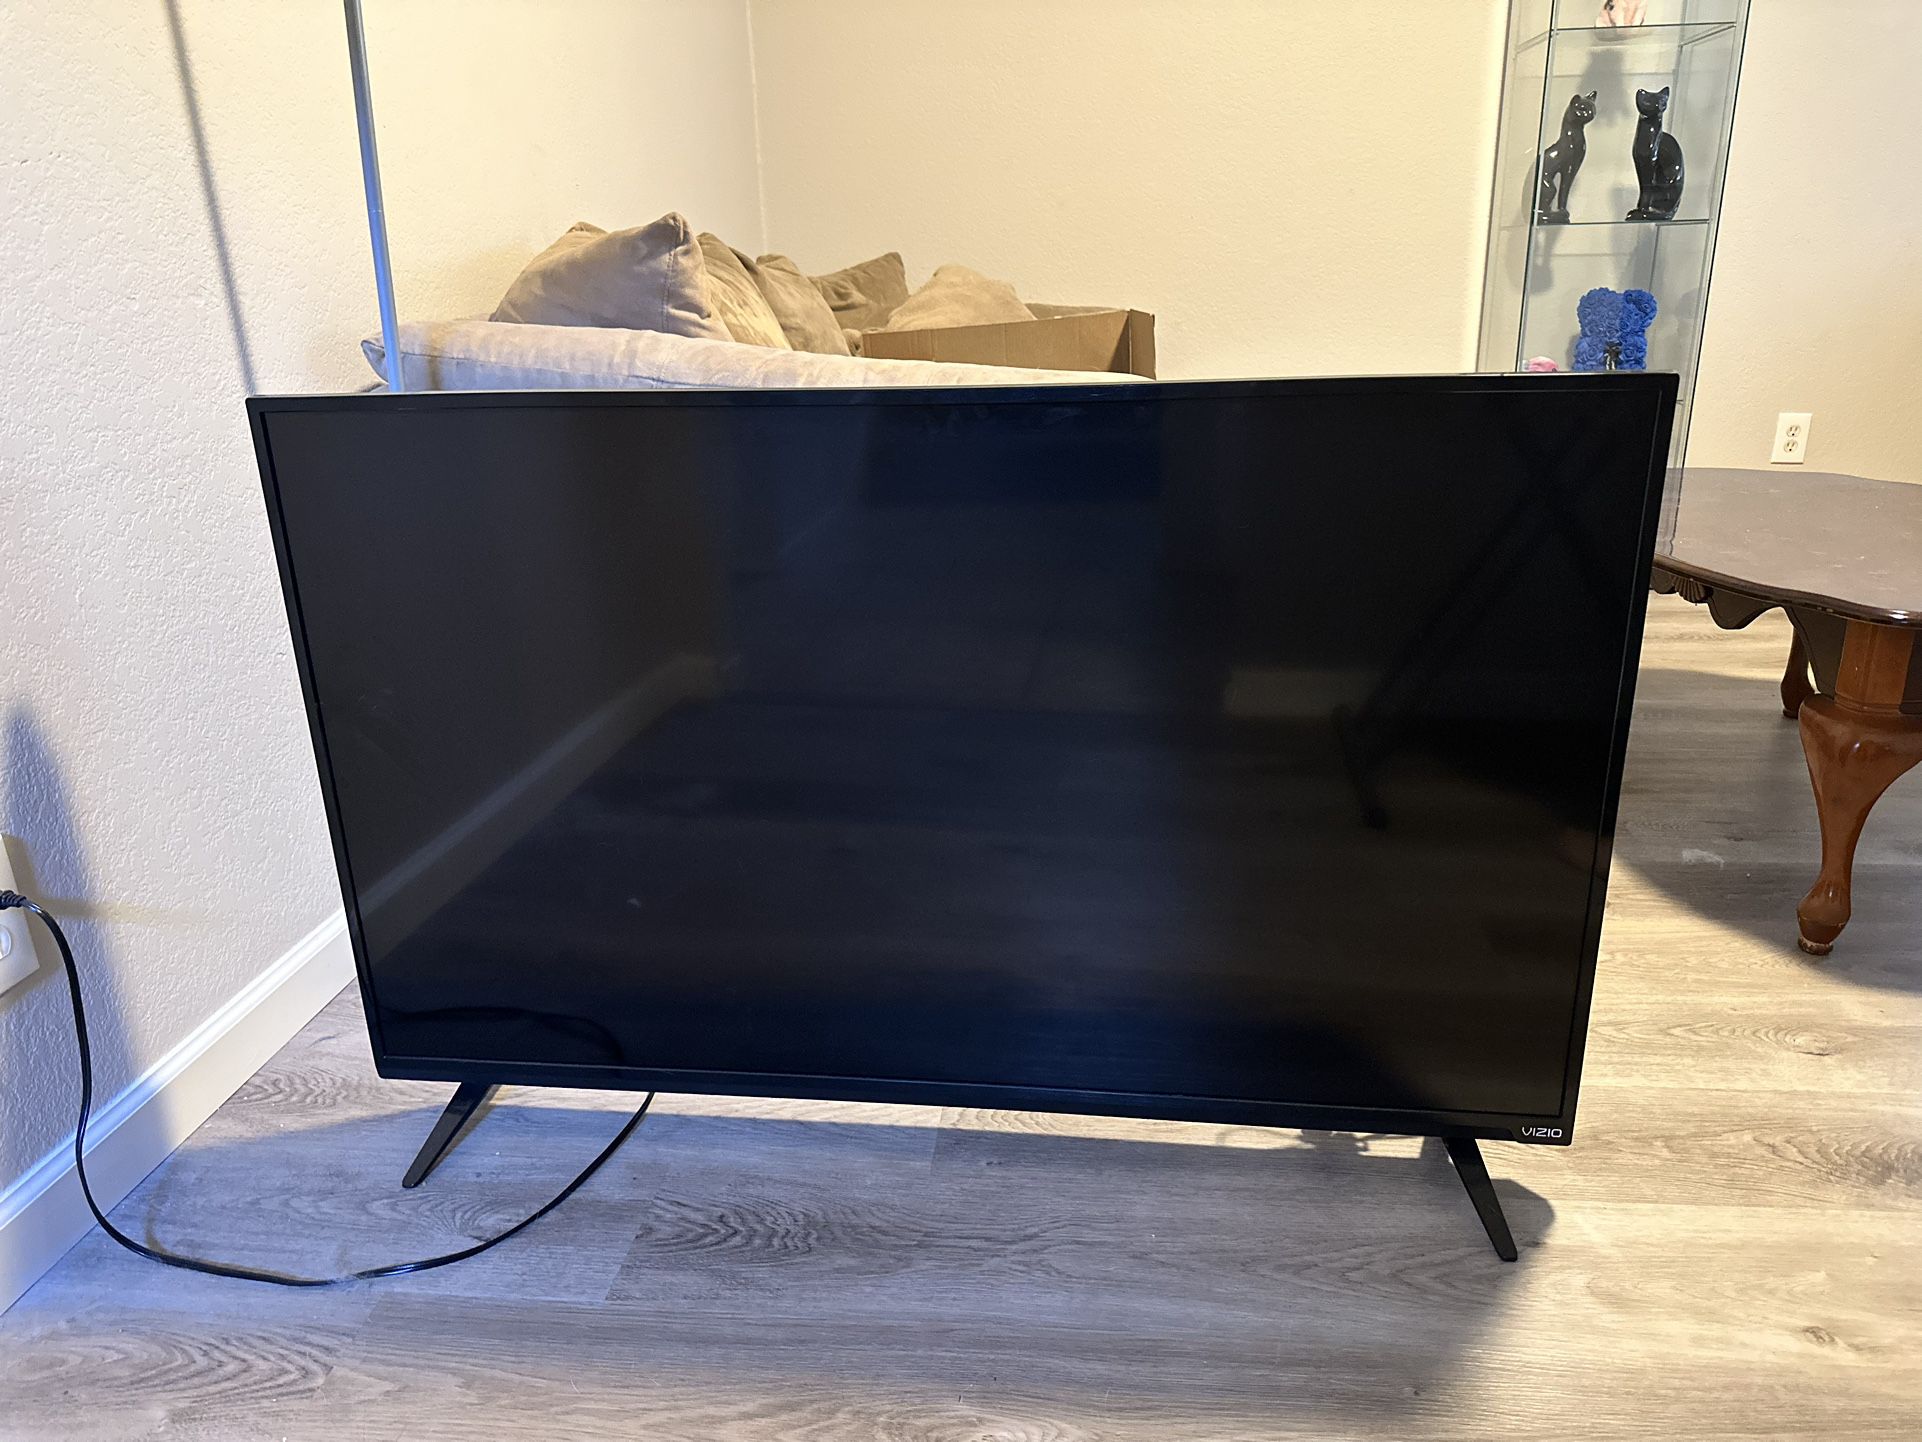 VIZIO 50” AND 3rd Generation Apple TV Connection 